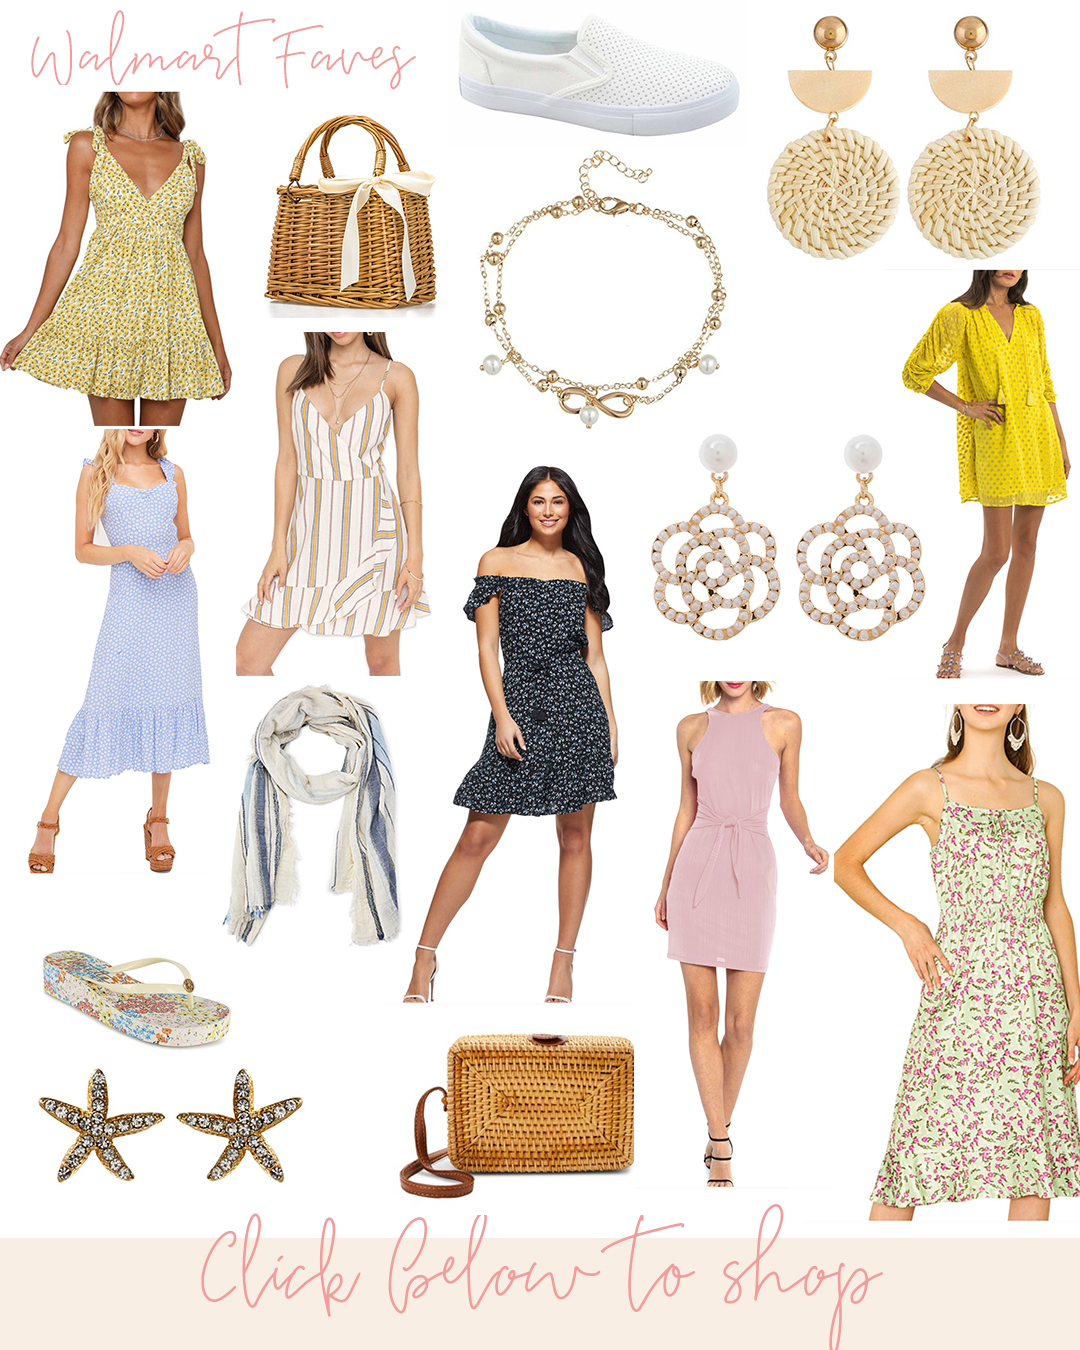 Affordable Walmart Favorites - July Edition // Cute and inexpensive summer dresses, straw bags, and resort accessories perfect for the season! 